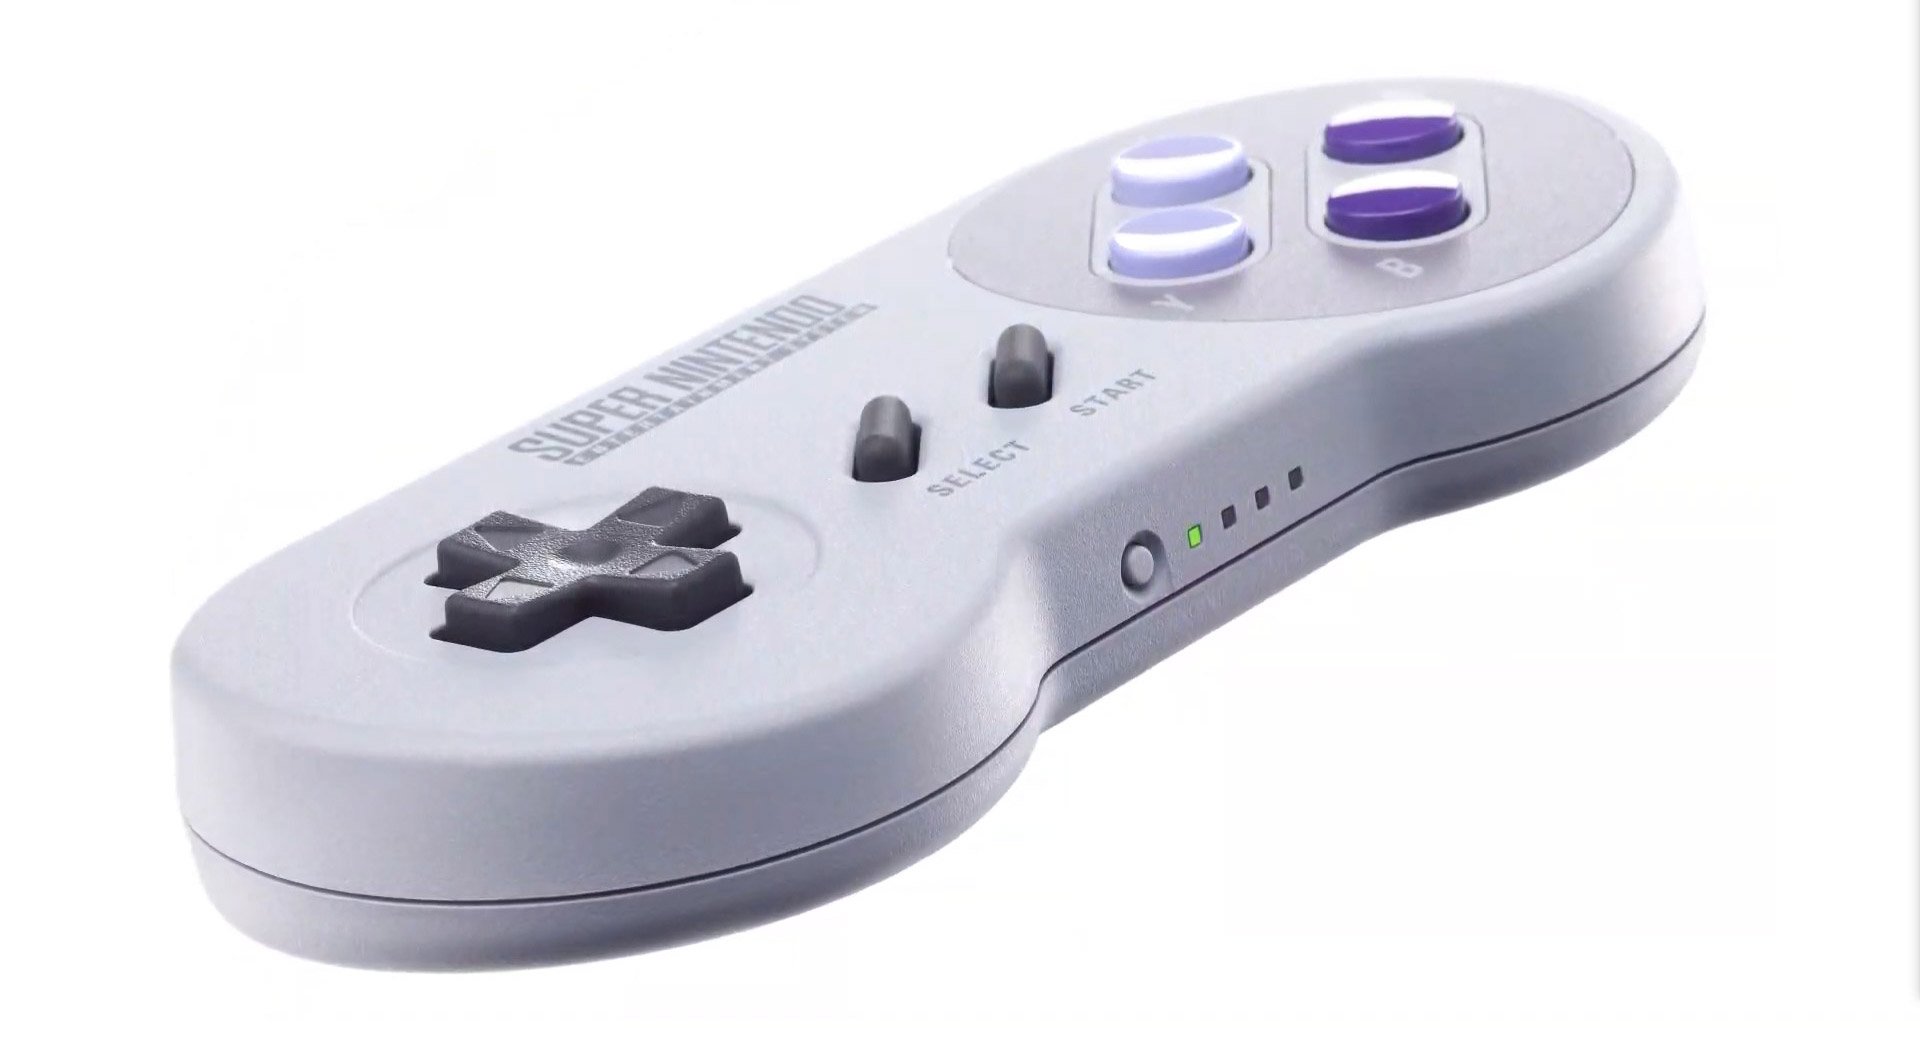 I'm glad I got an SNES controller for my Switch